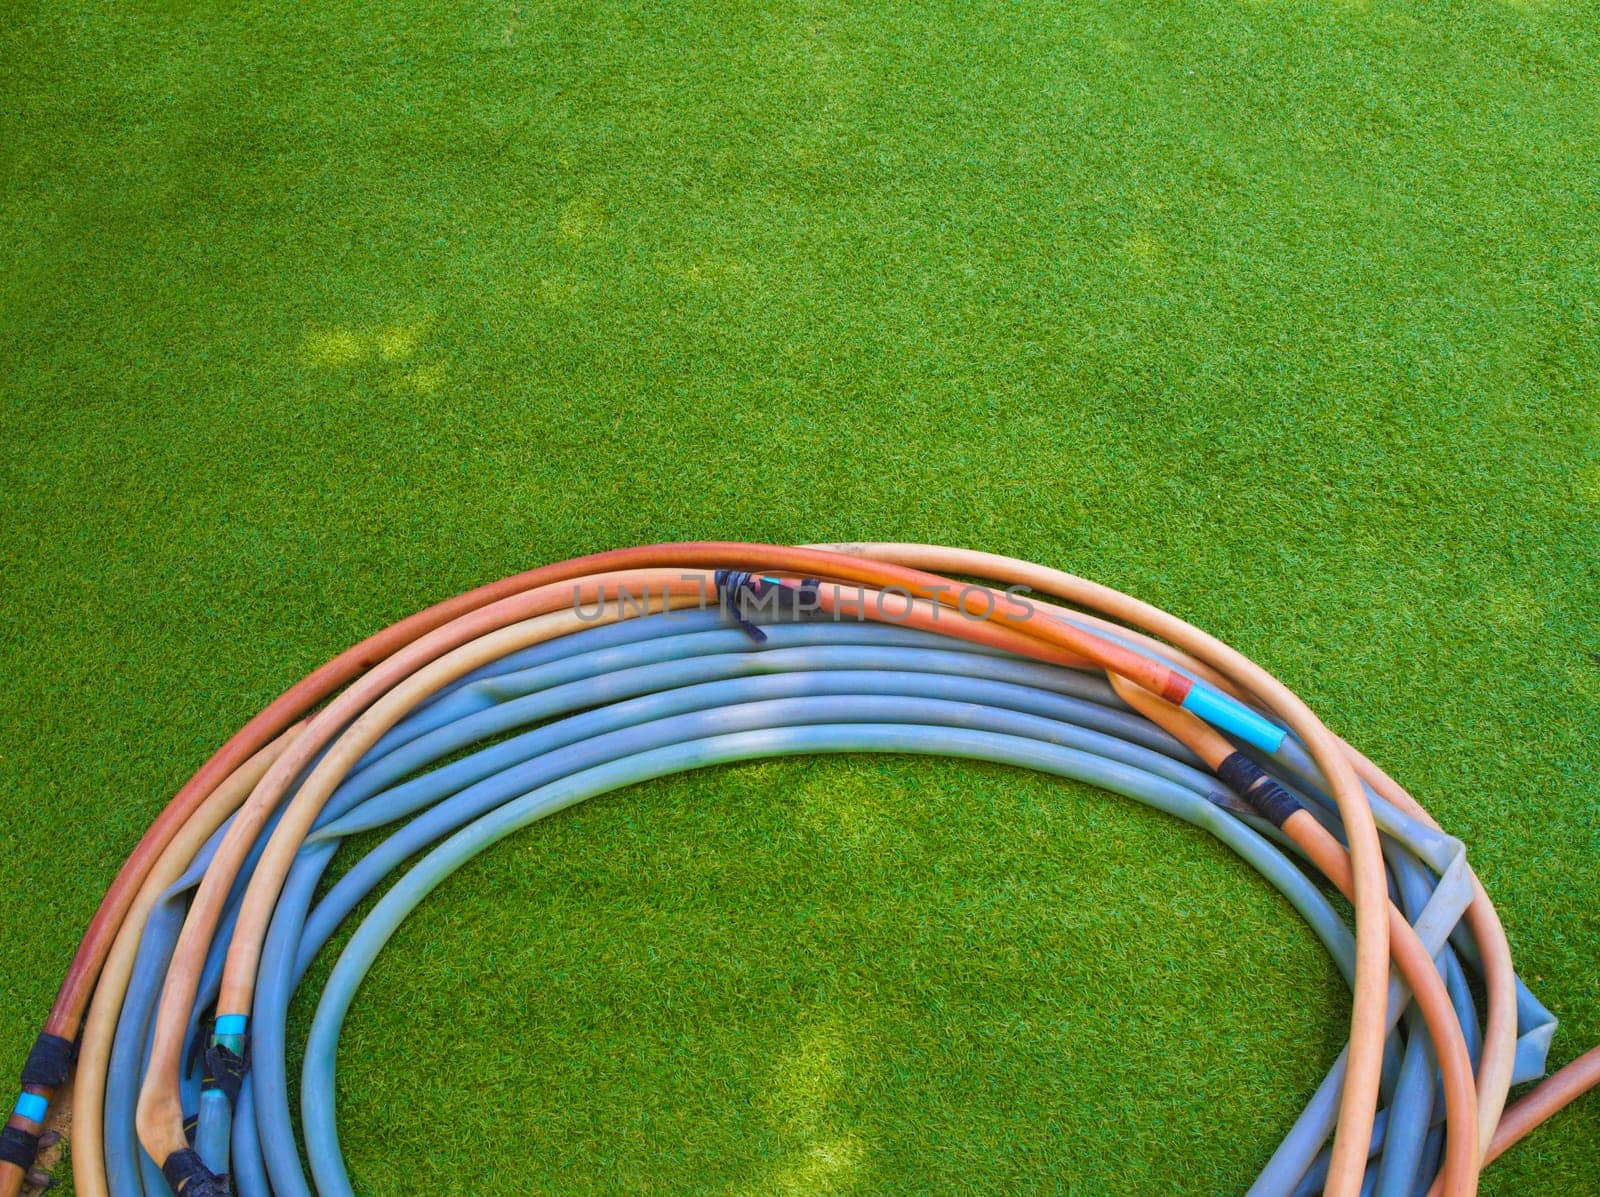 The old Rubber hose on Artificial grass